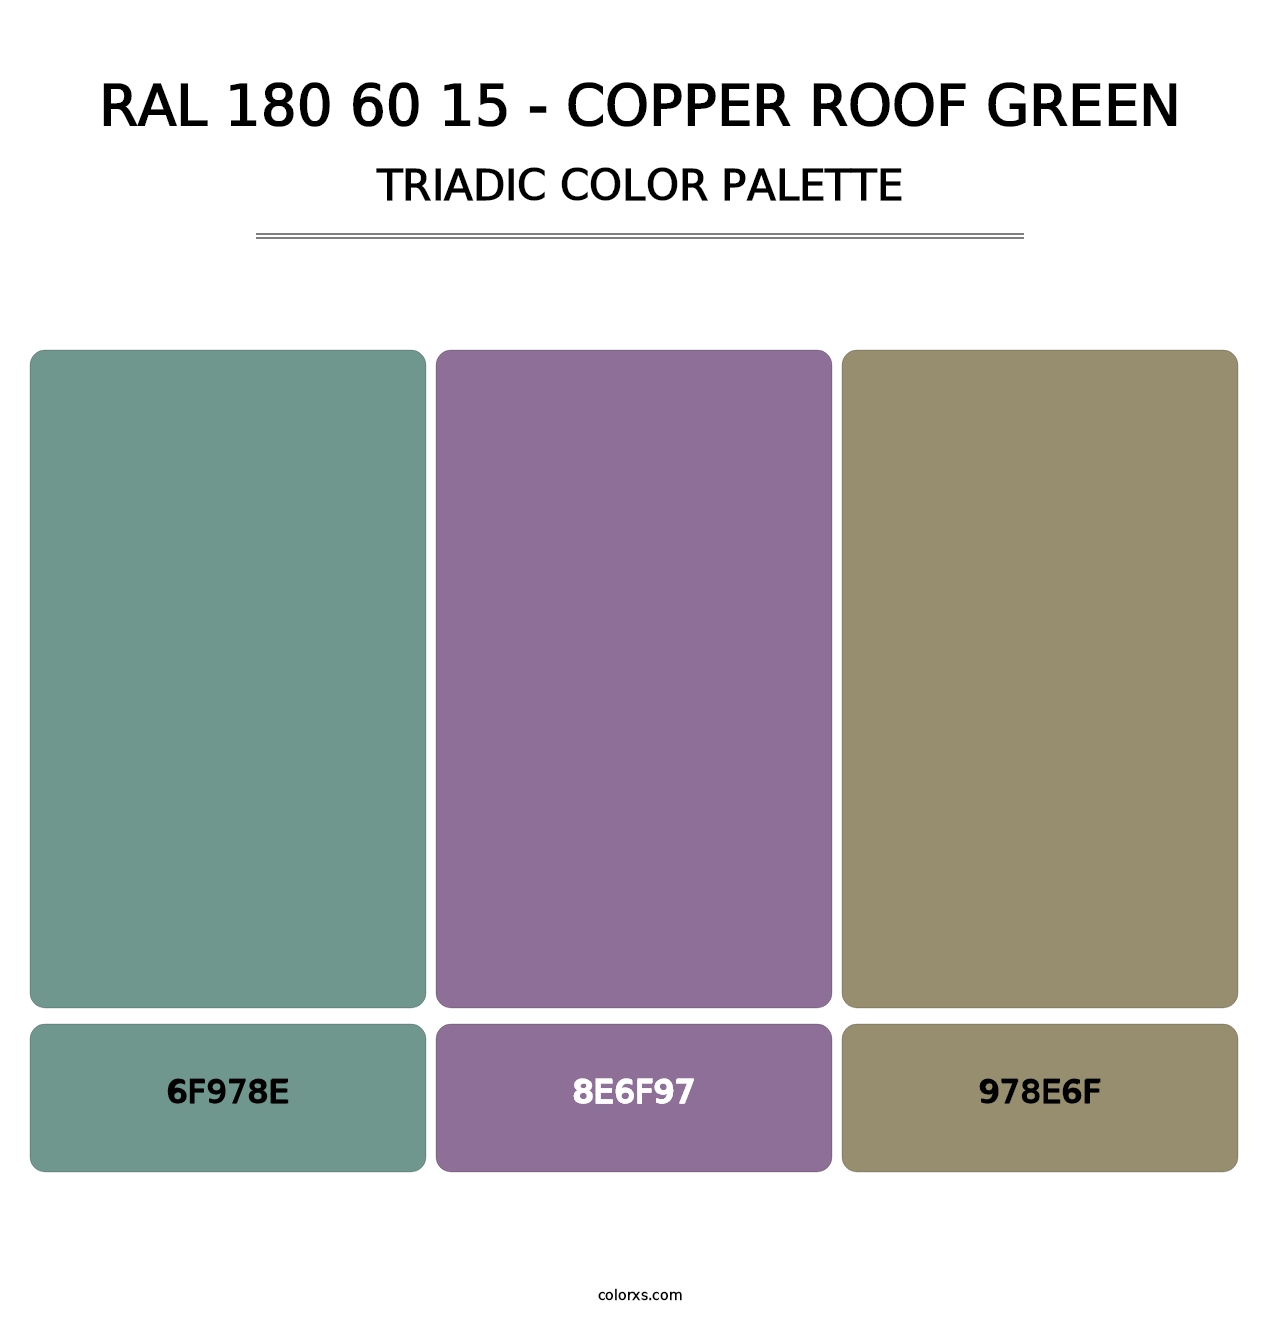 RAL 180 60 15 - Copper Roof Green - Triadic Color Palette